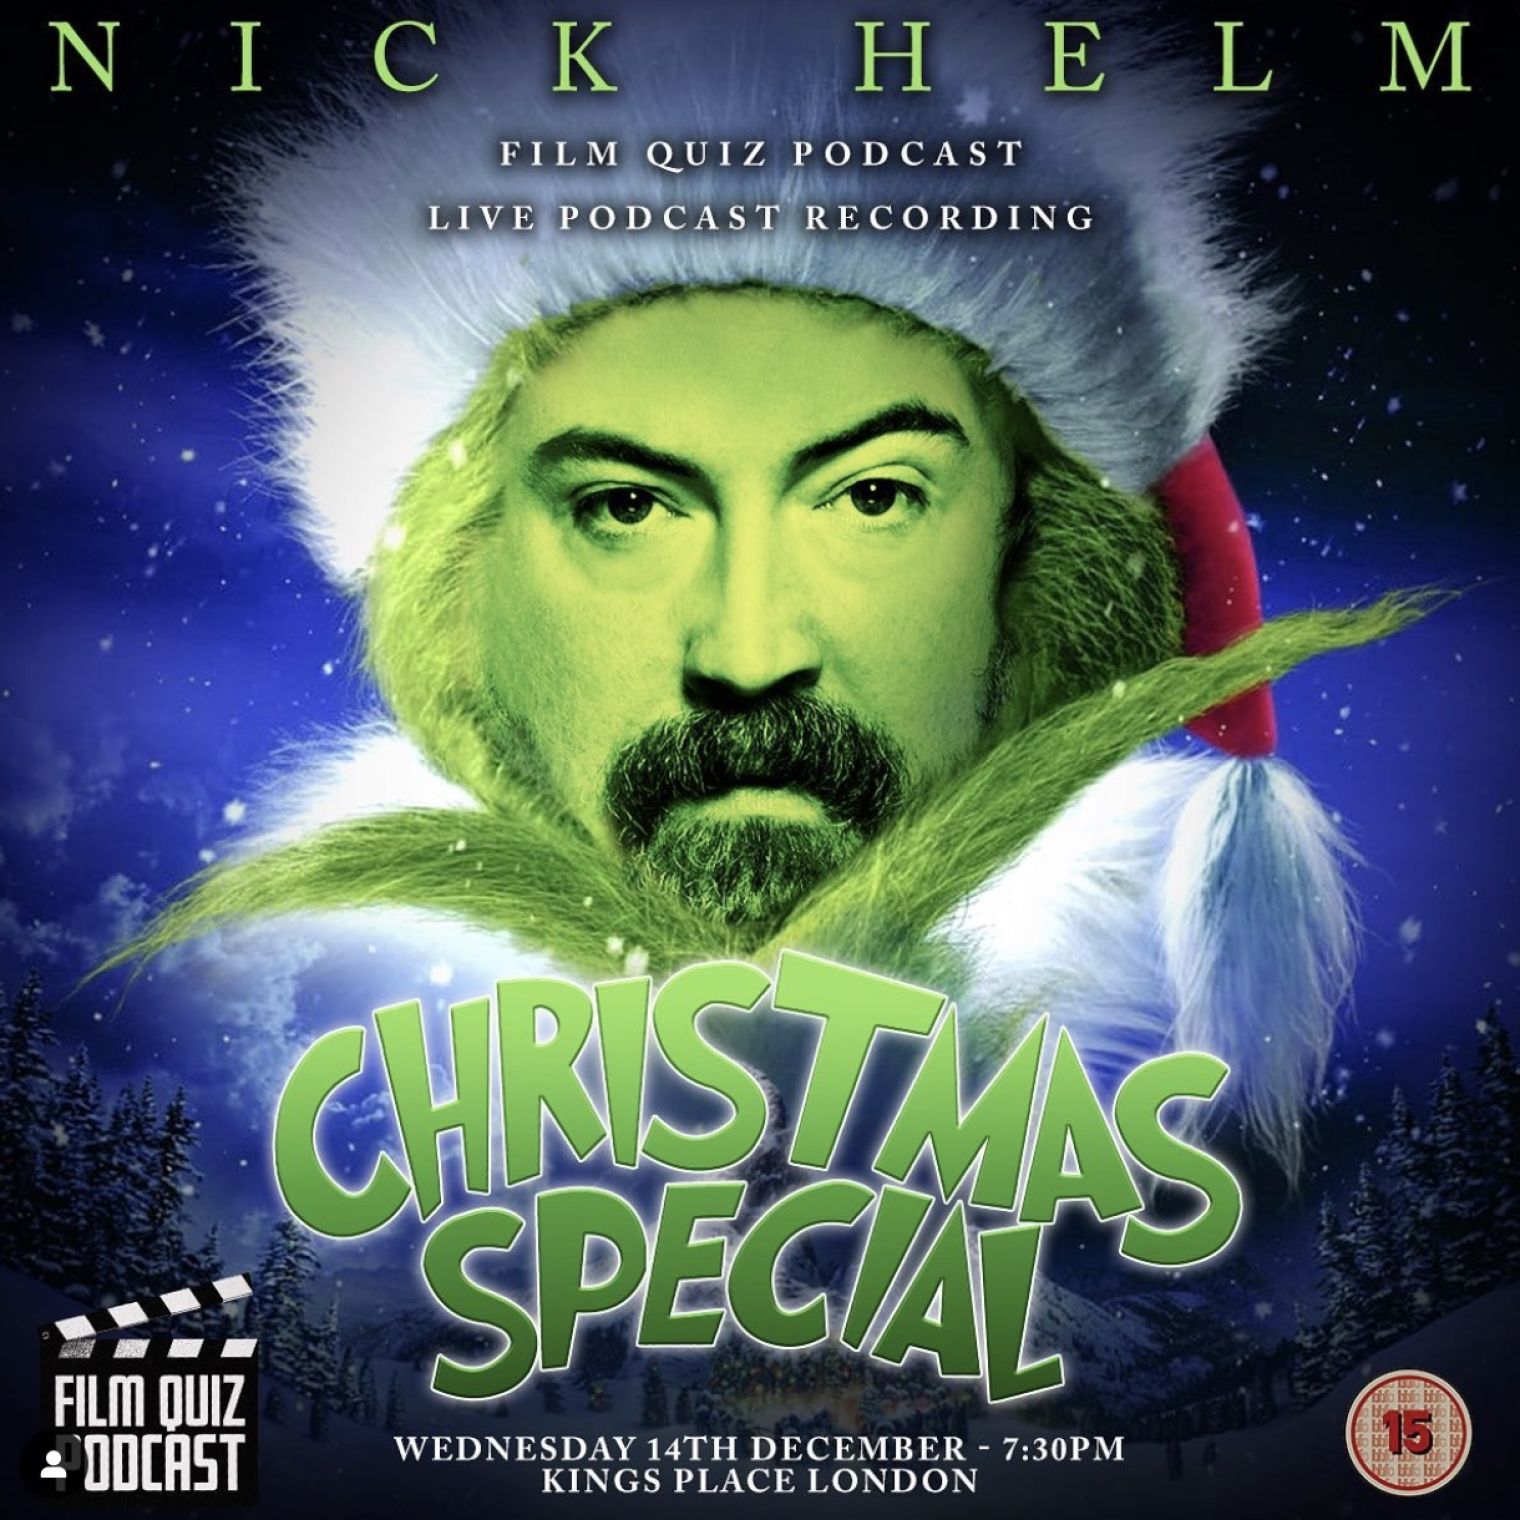 Nick Helm's Film Quiz Podcast Christmas Special takes place tonight at London's Kings Place